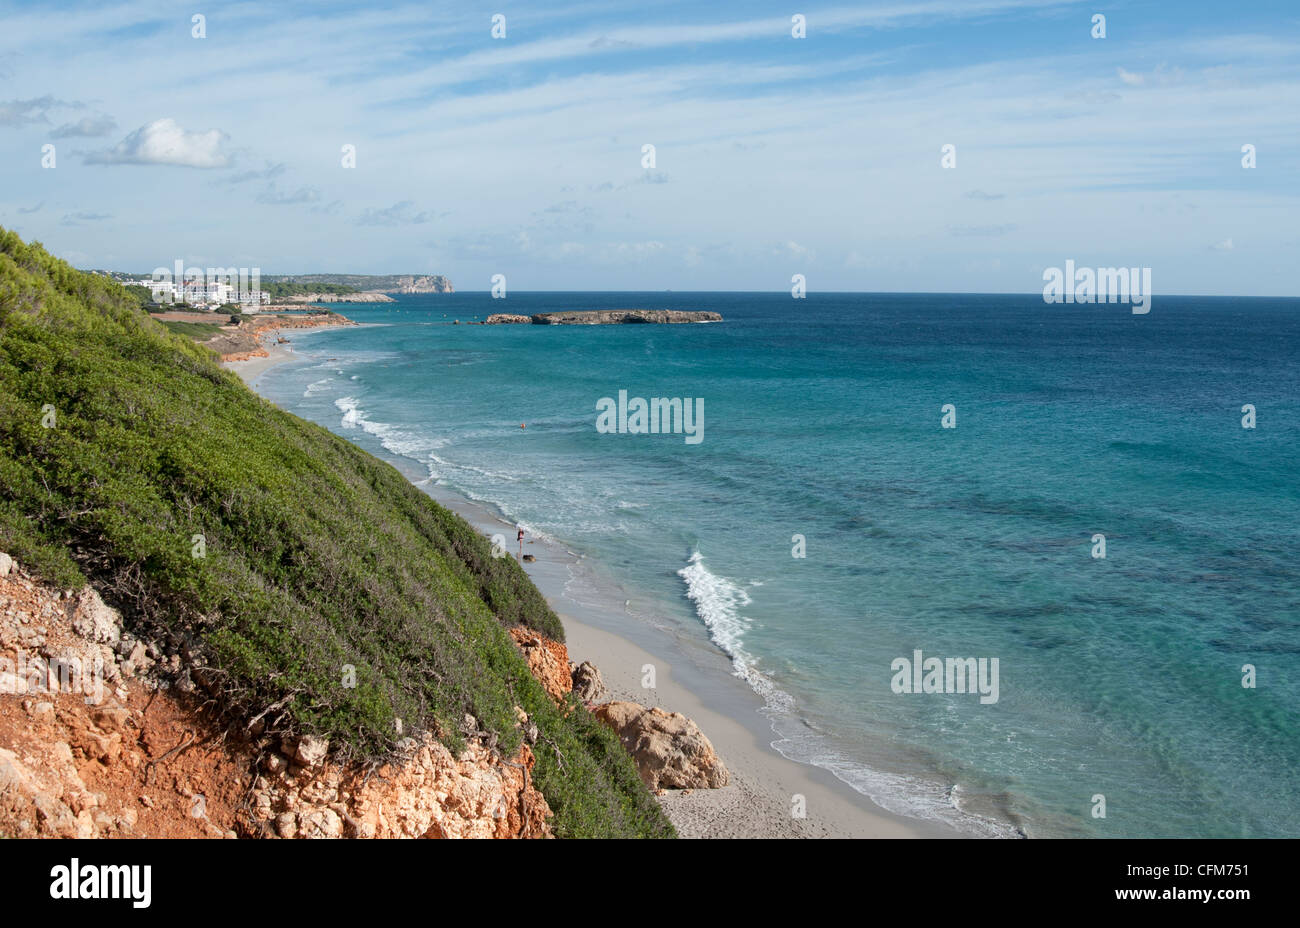 Looking down at the clear blue waters of Binigaus beach from the cliffs near Sant Tomas resort Menorca Spain Stock Photo